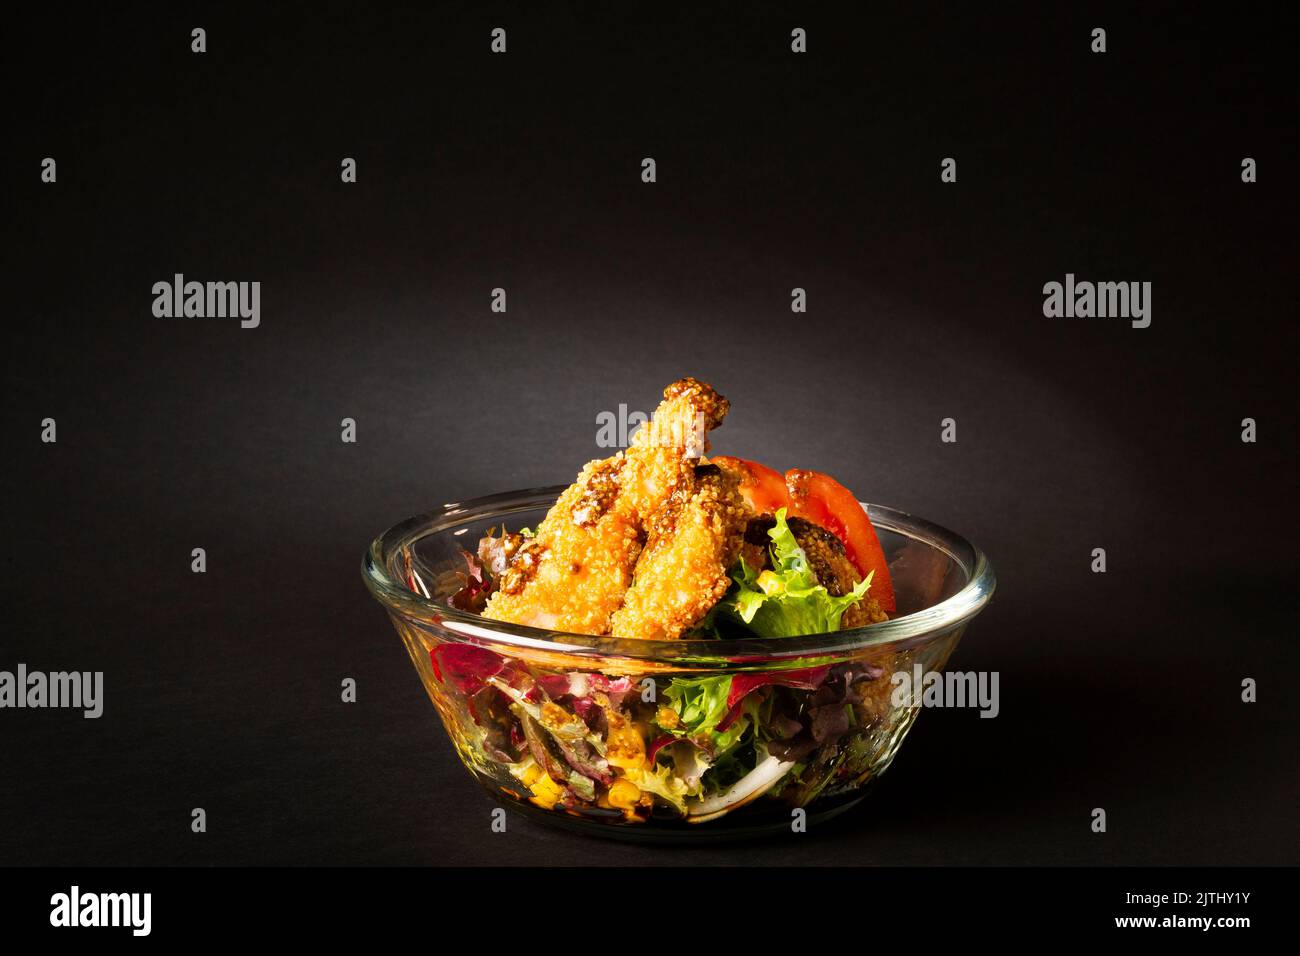 Green salad with chicken fingers on top in a big bowl over a black background Stock Photo